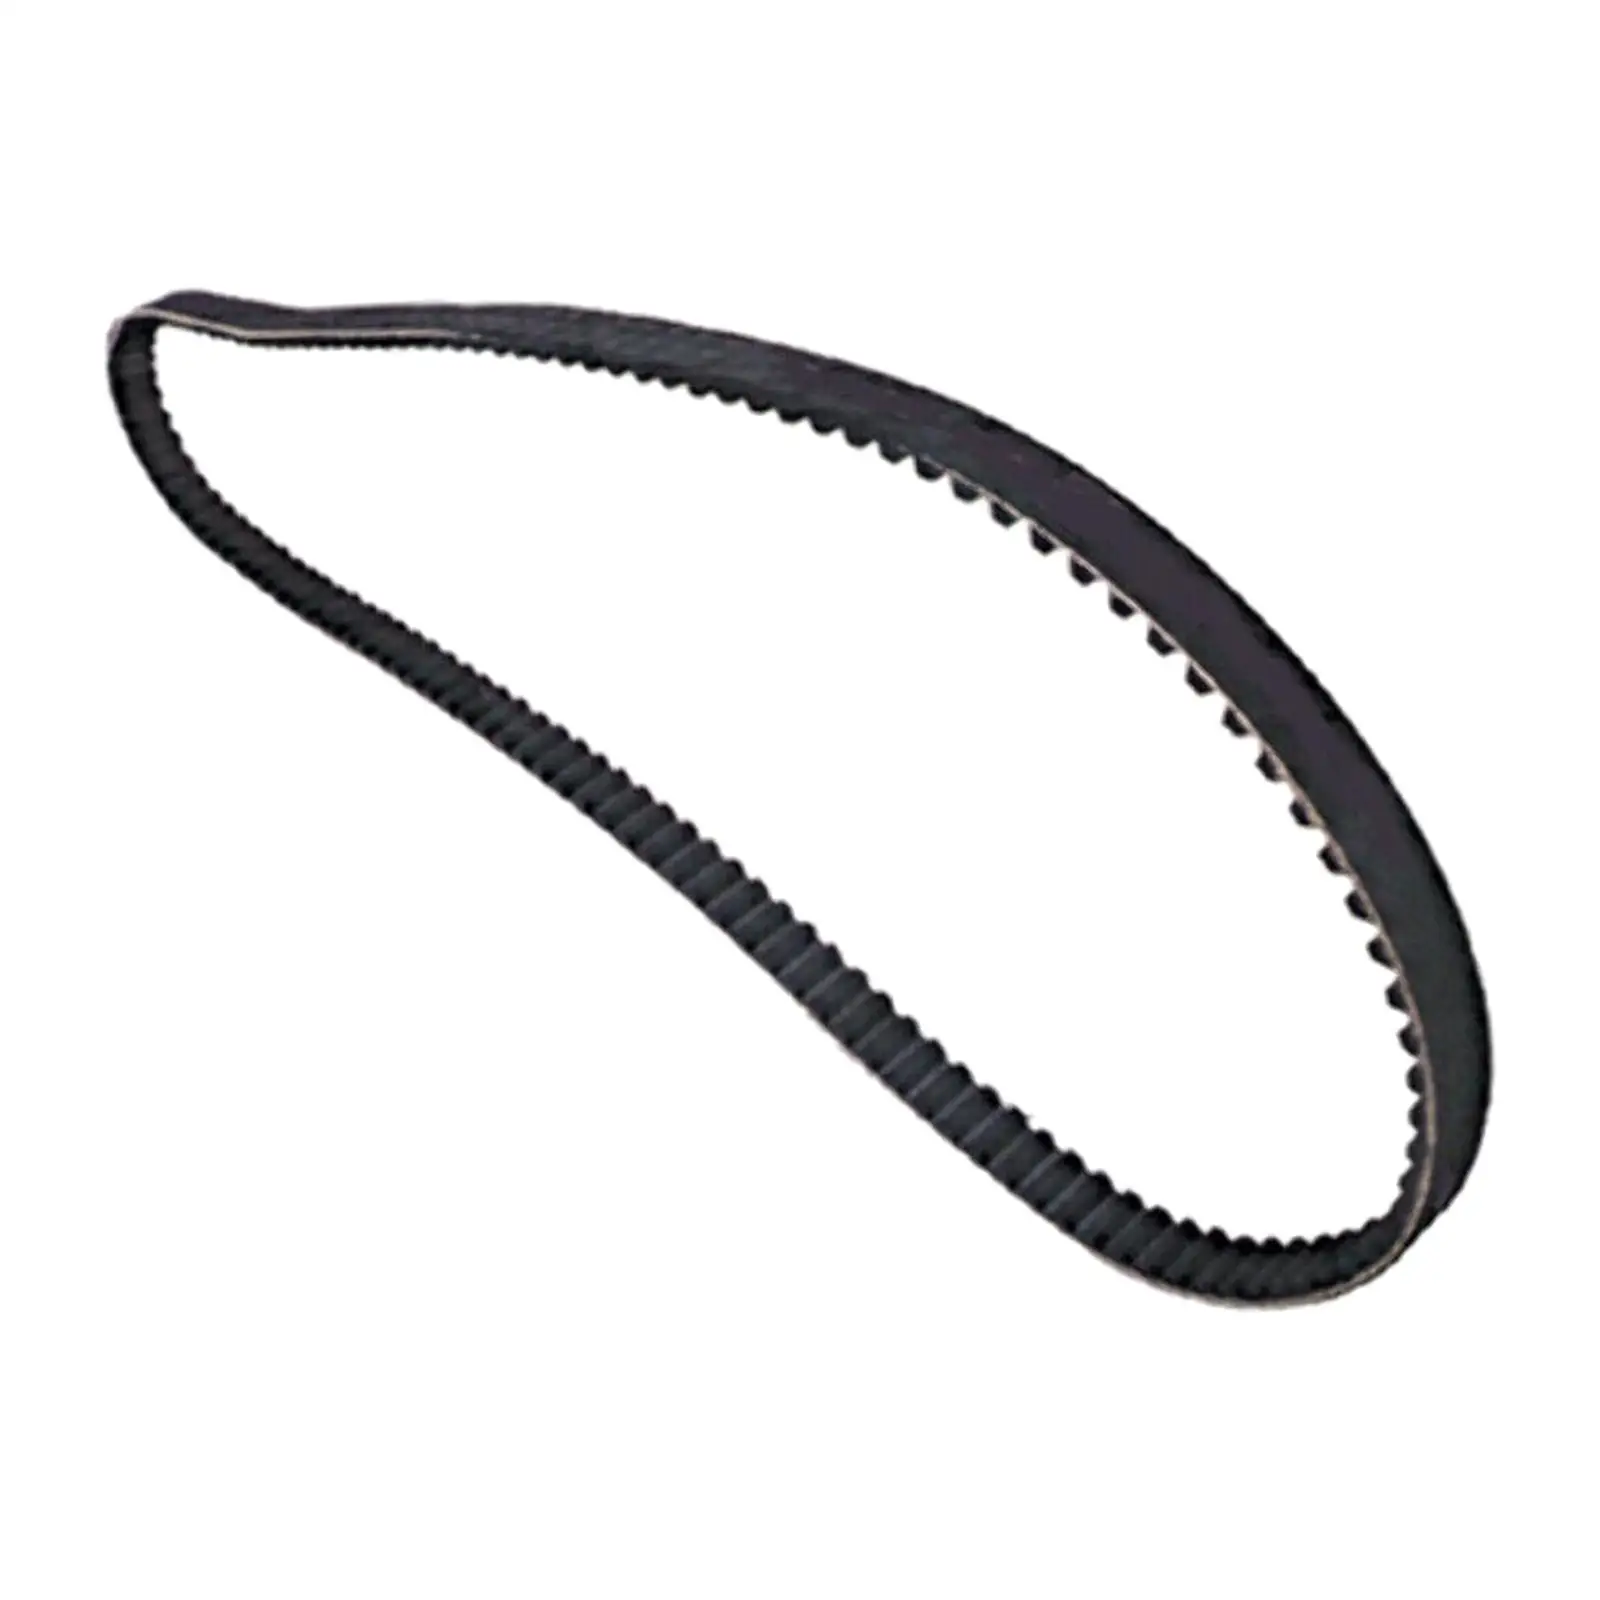 Rear Drive Belt Motorcycle Accessories Rubber 1204-0051 40015-00 133 Tooth 1 1/8